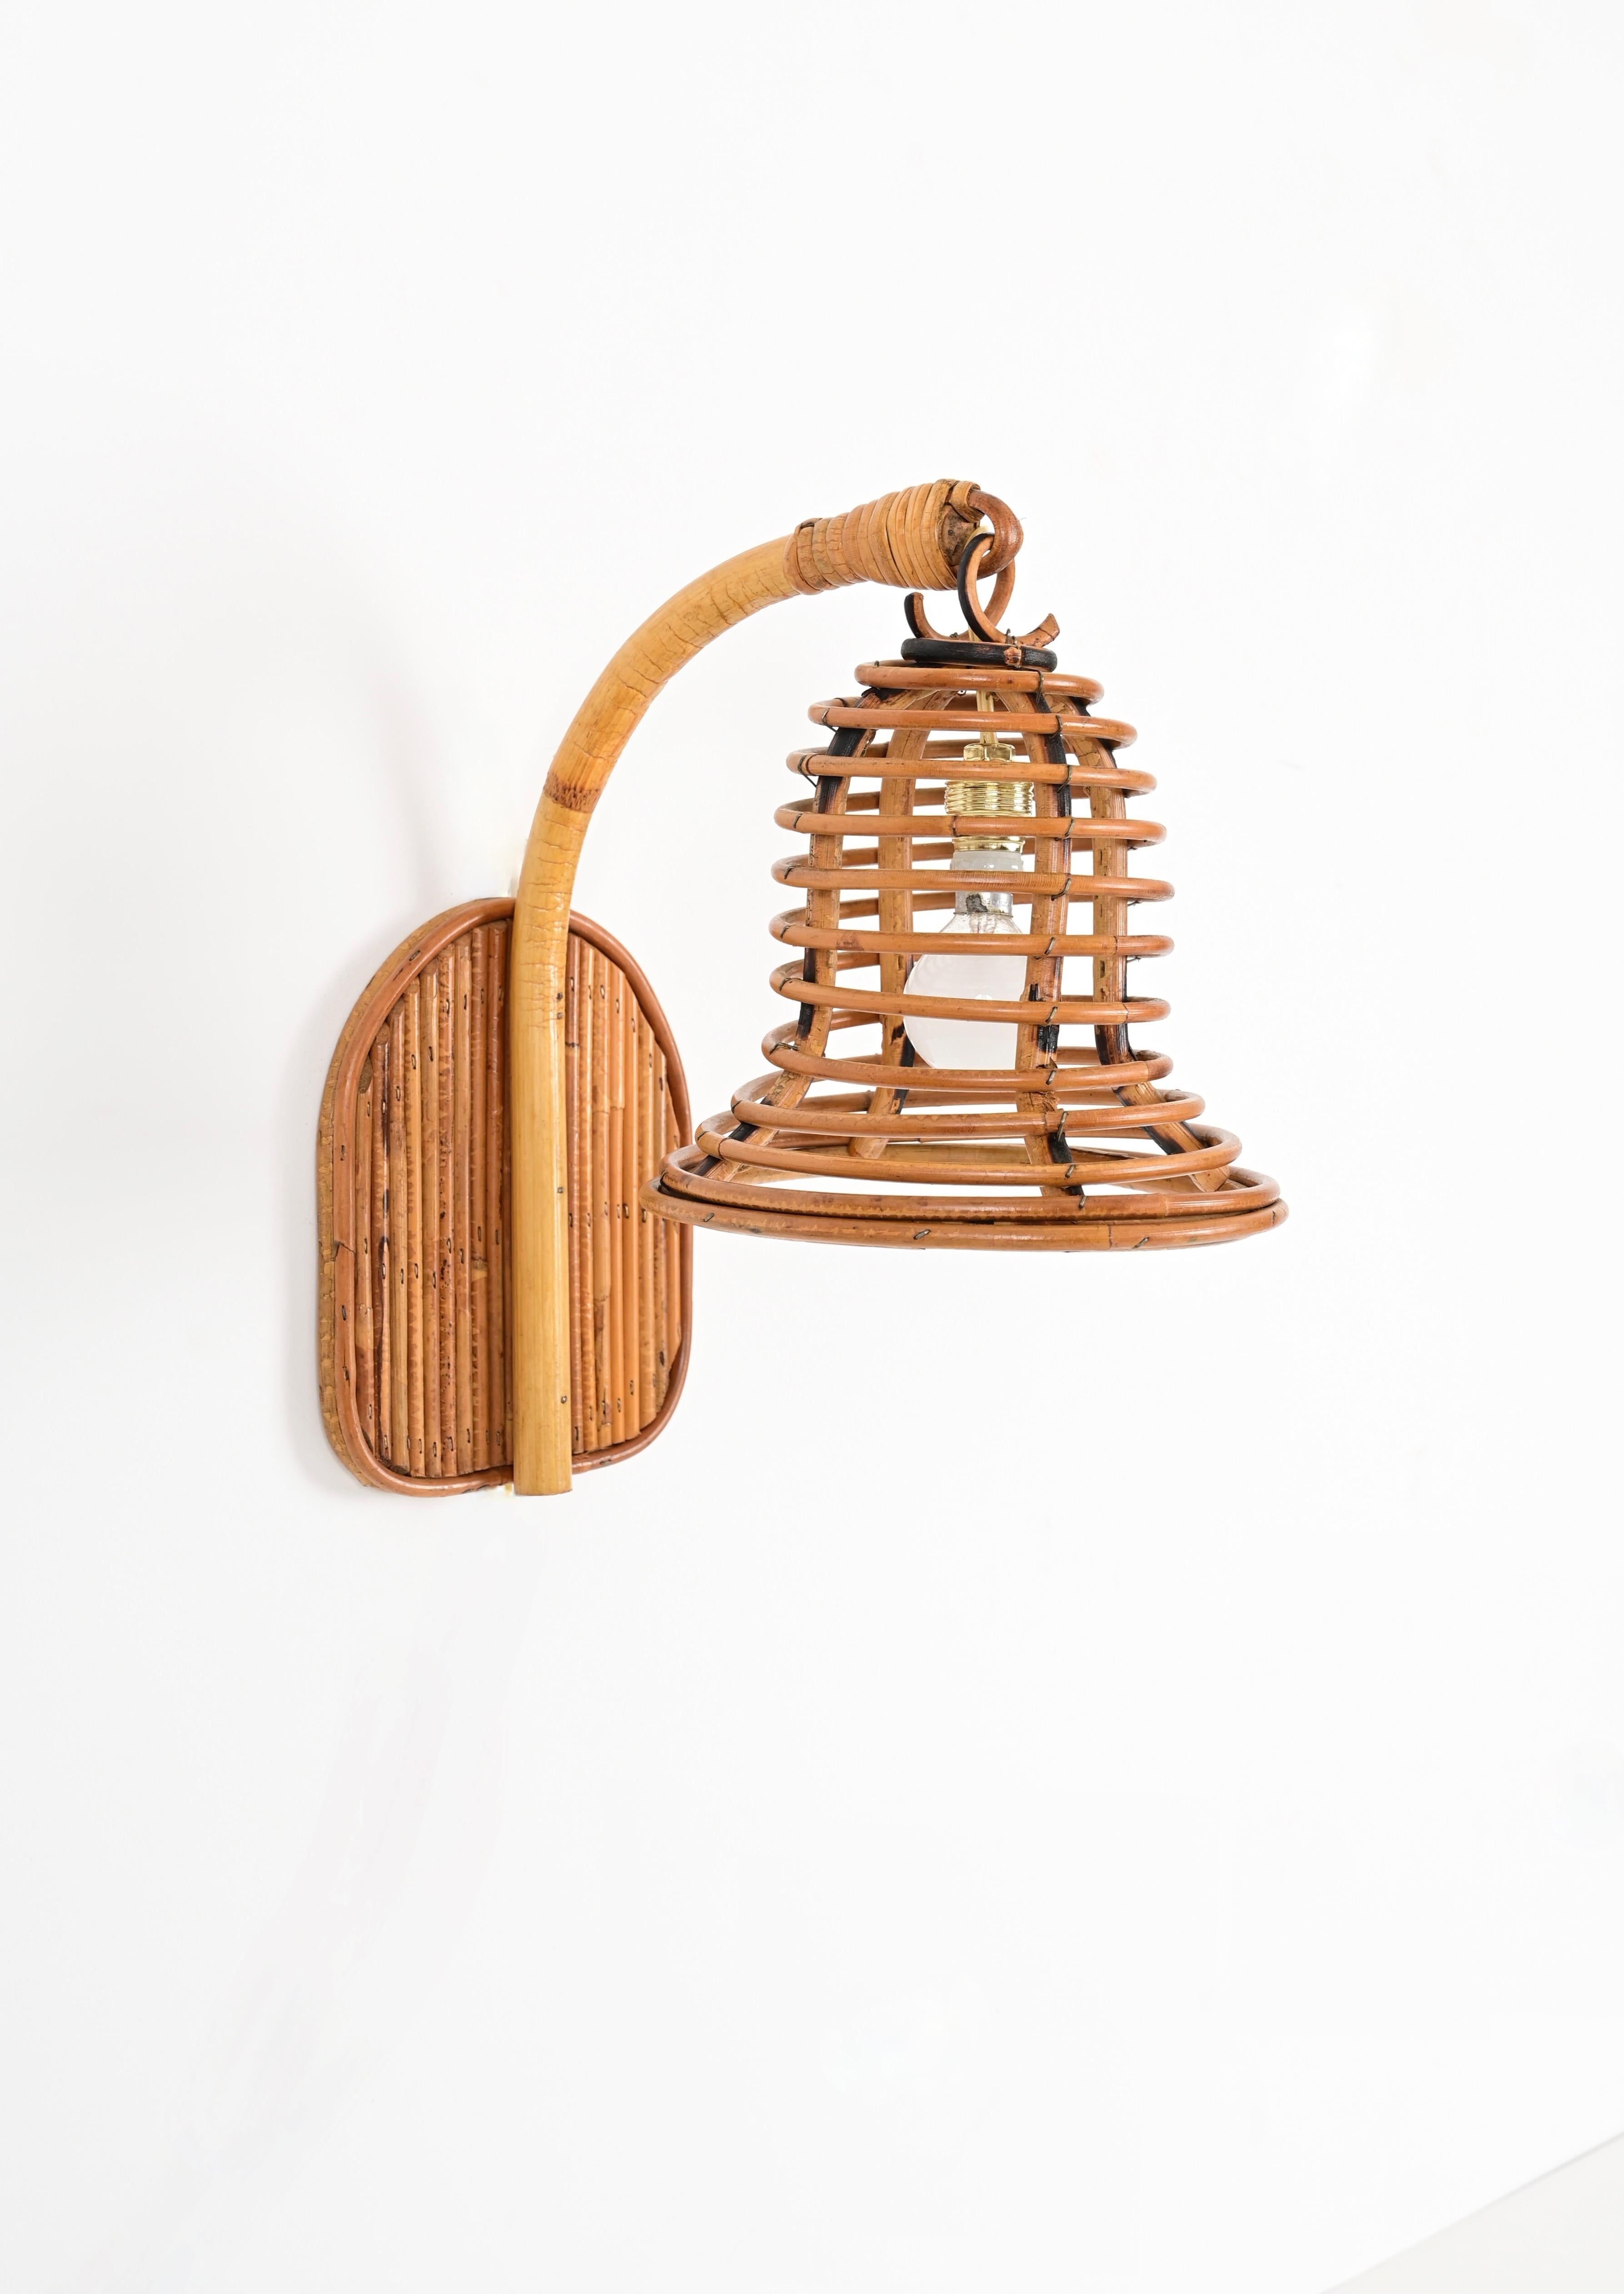 Hand-Crafted French Riviera Bell-Shaped Rattan and Wicker Sconce, Louis Sognot, France 1960s